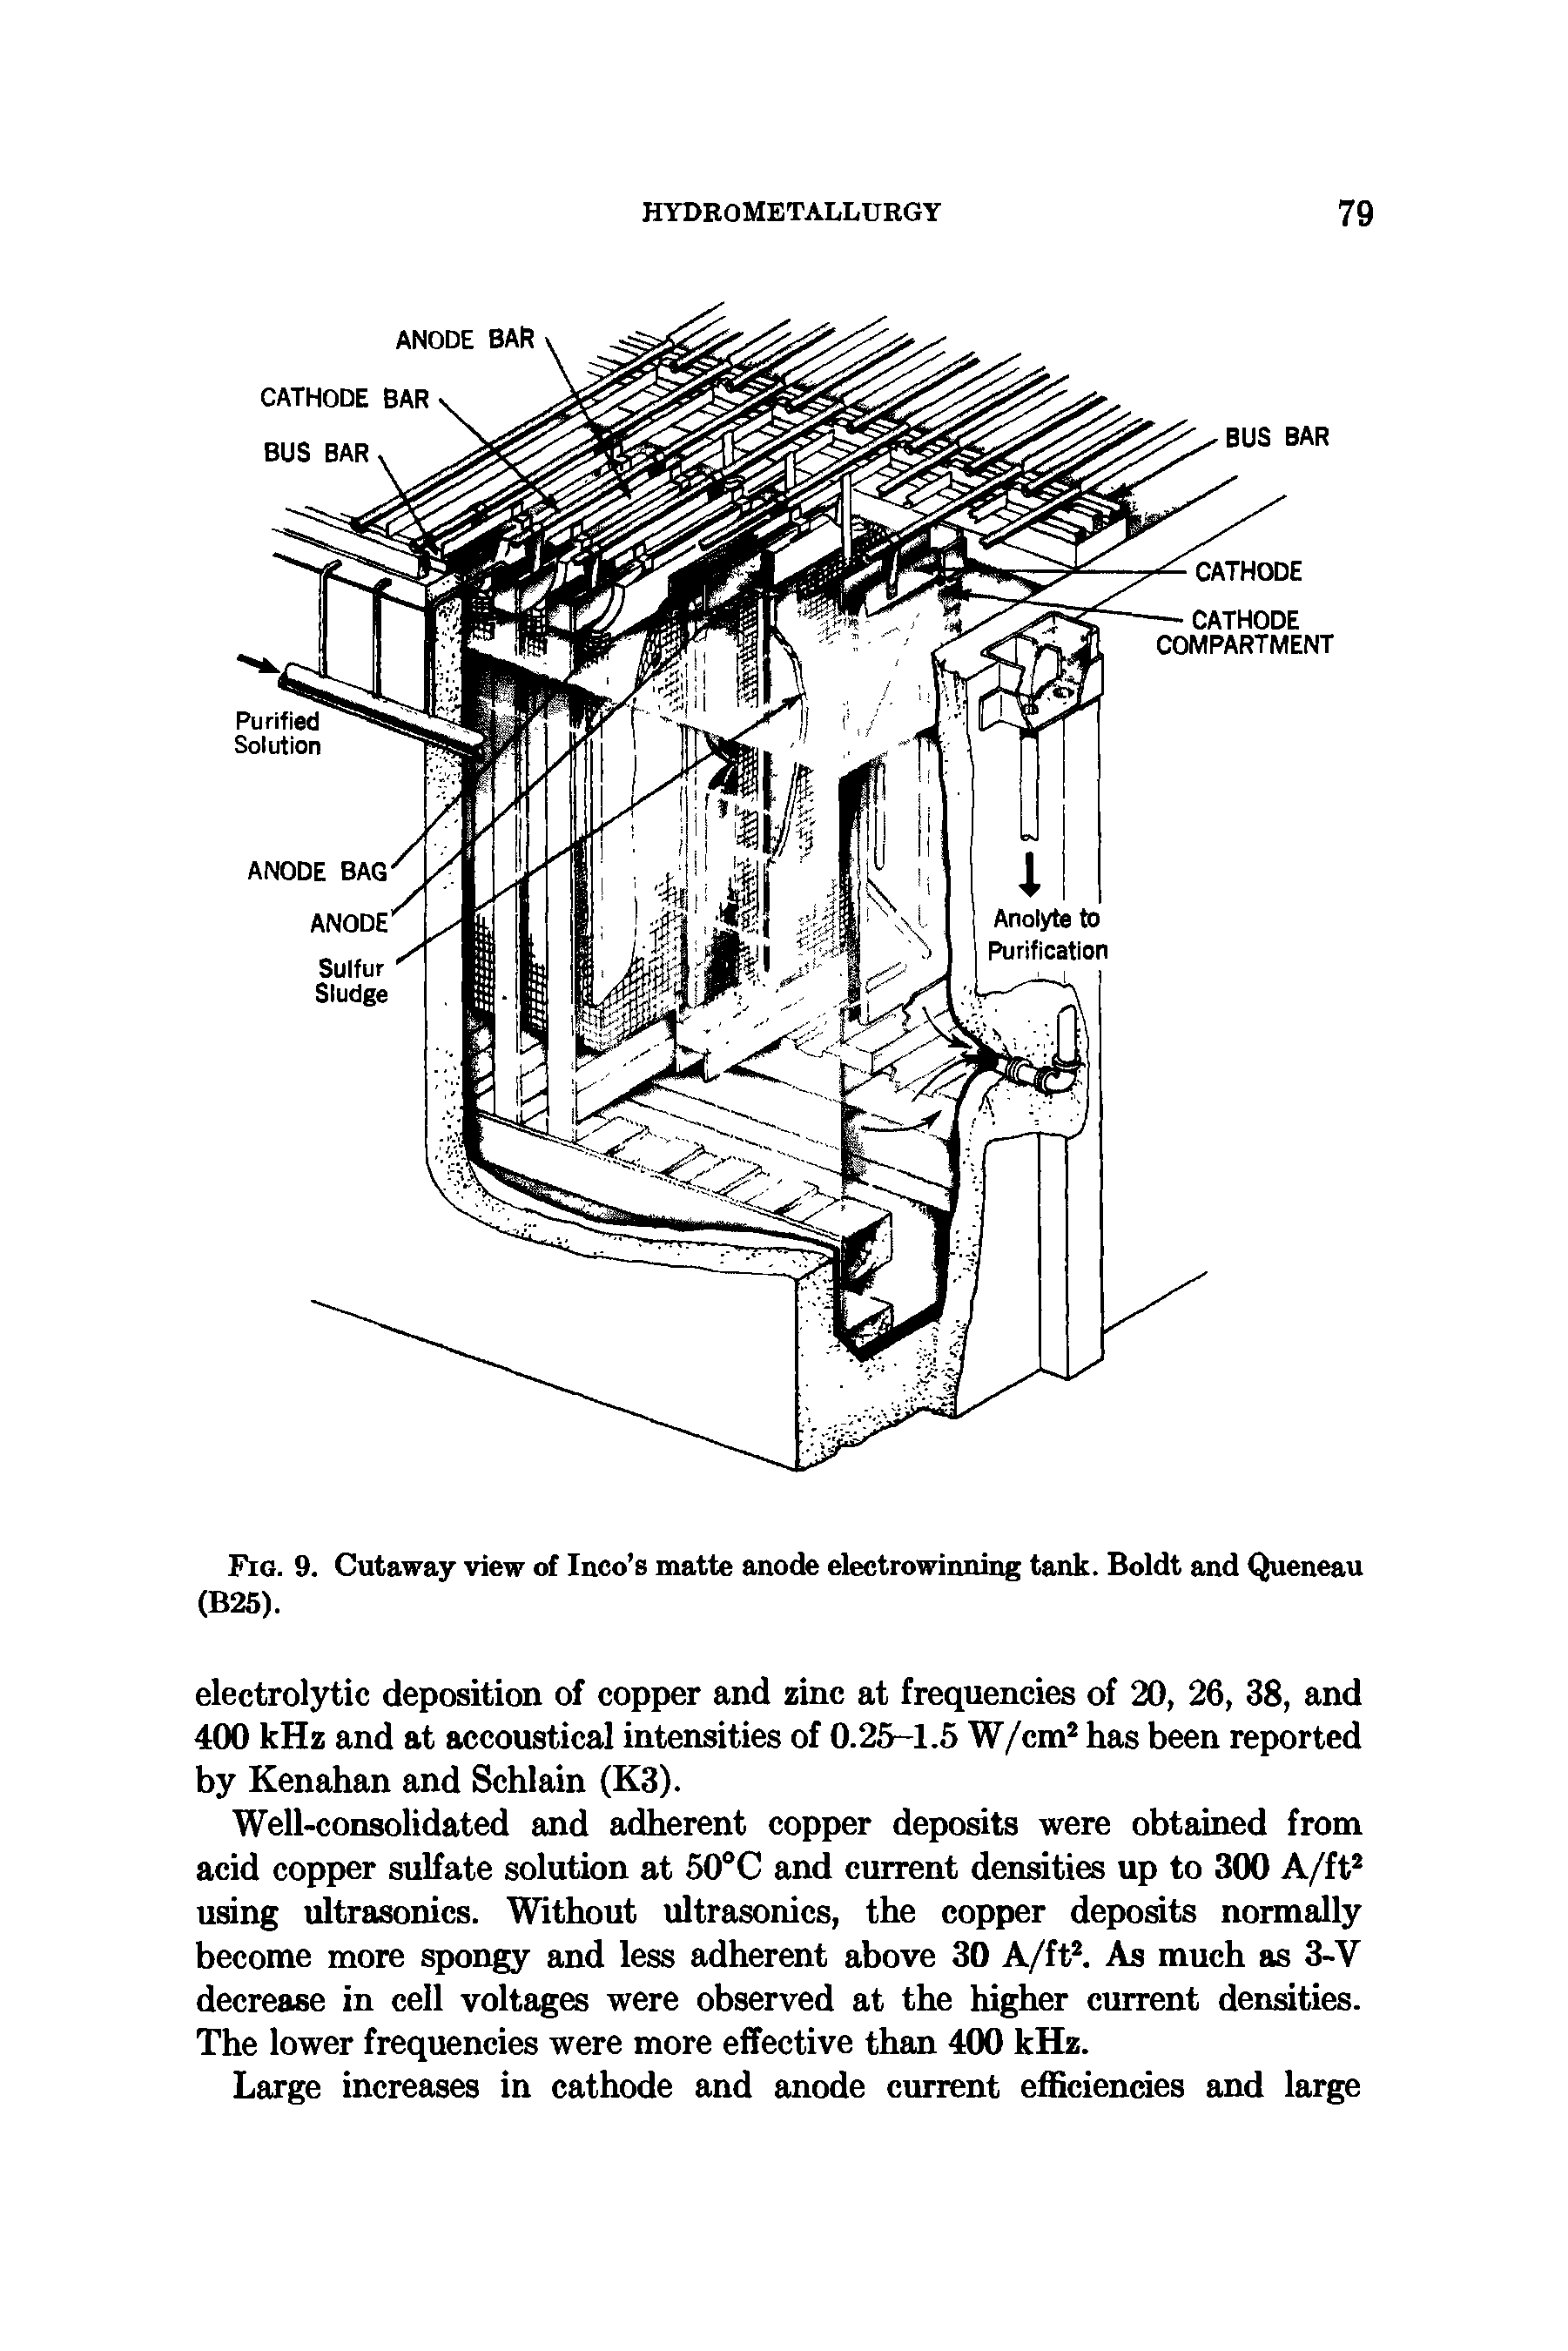 Fig. 9. Cutaway view of Inco s matte anode electrowinning tank. Boldt and Queneau (B25).